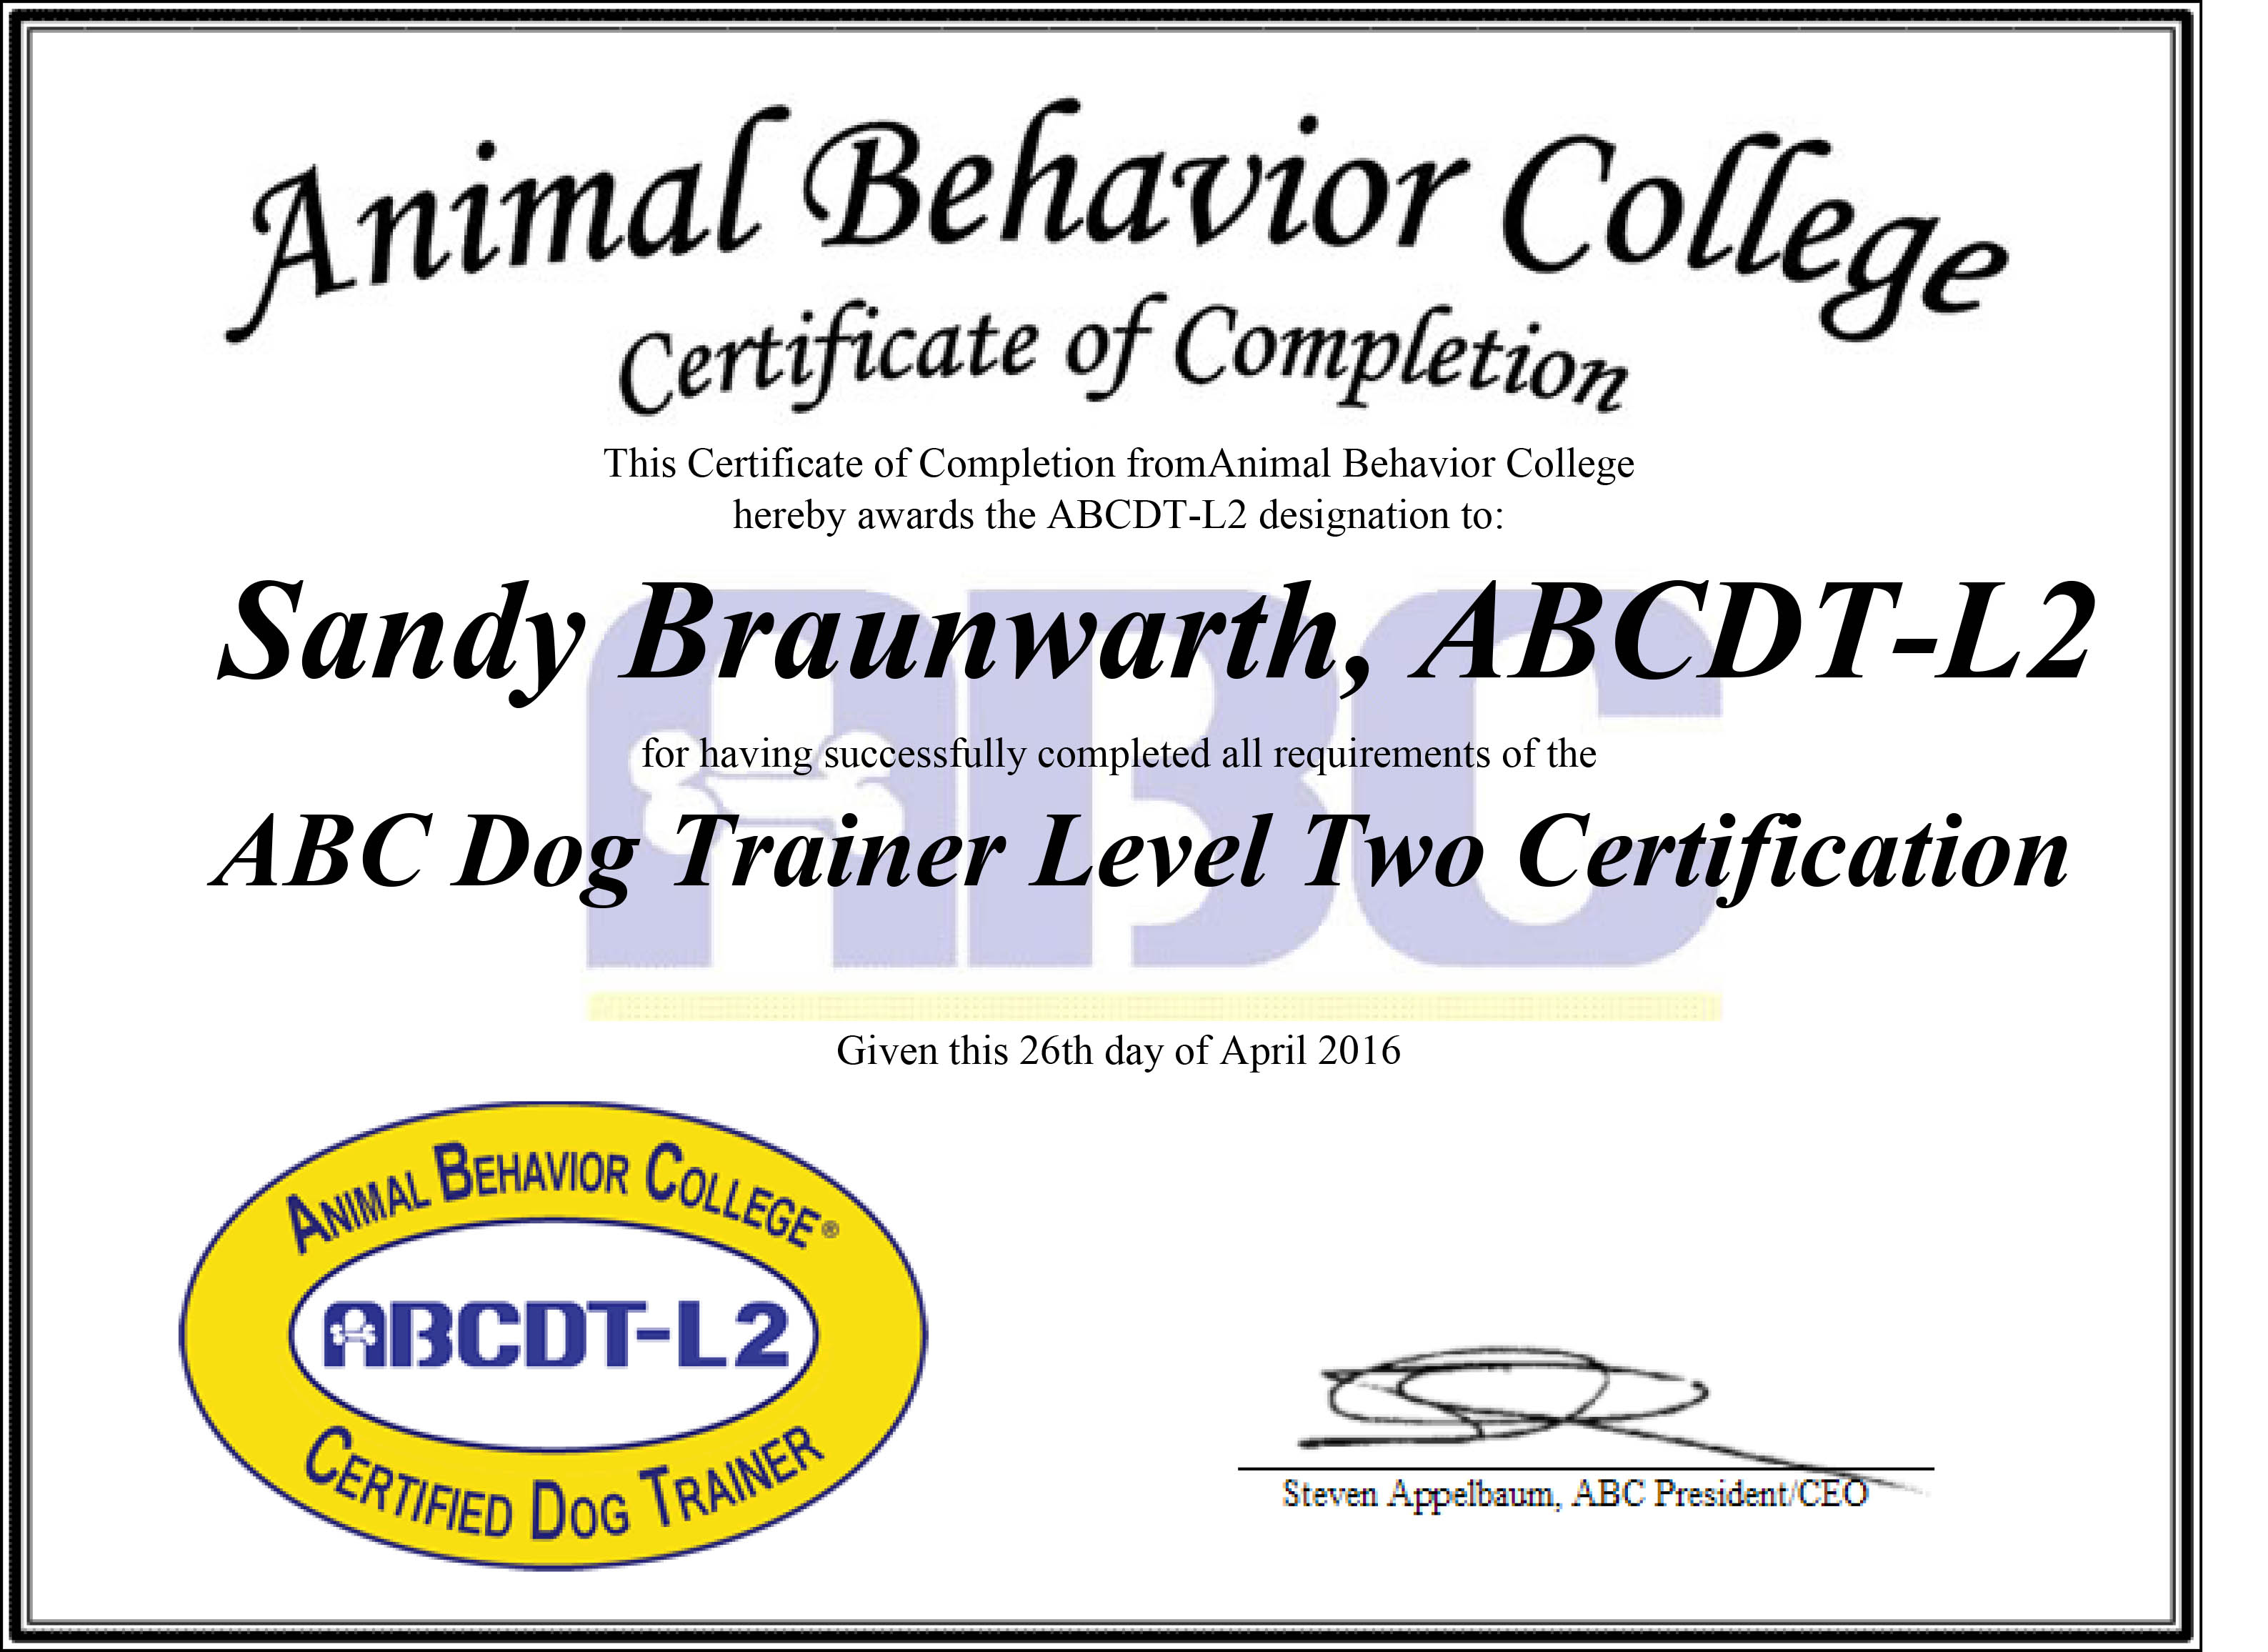 abc certified dog trainer